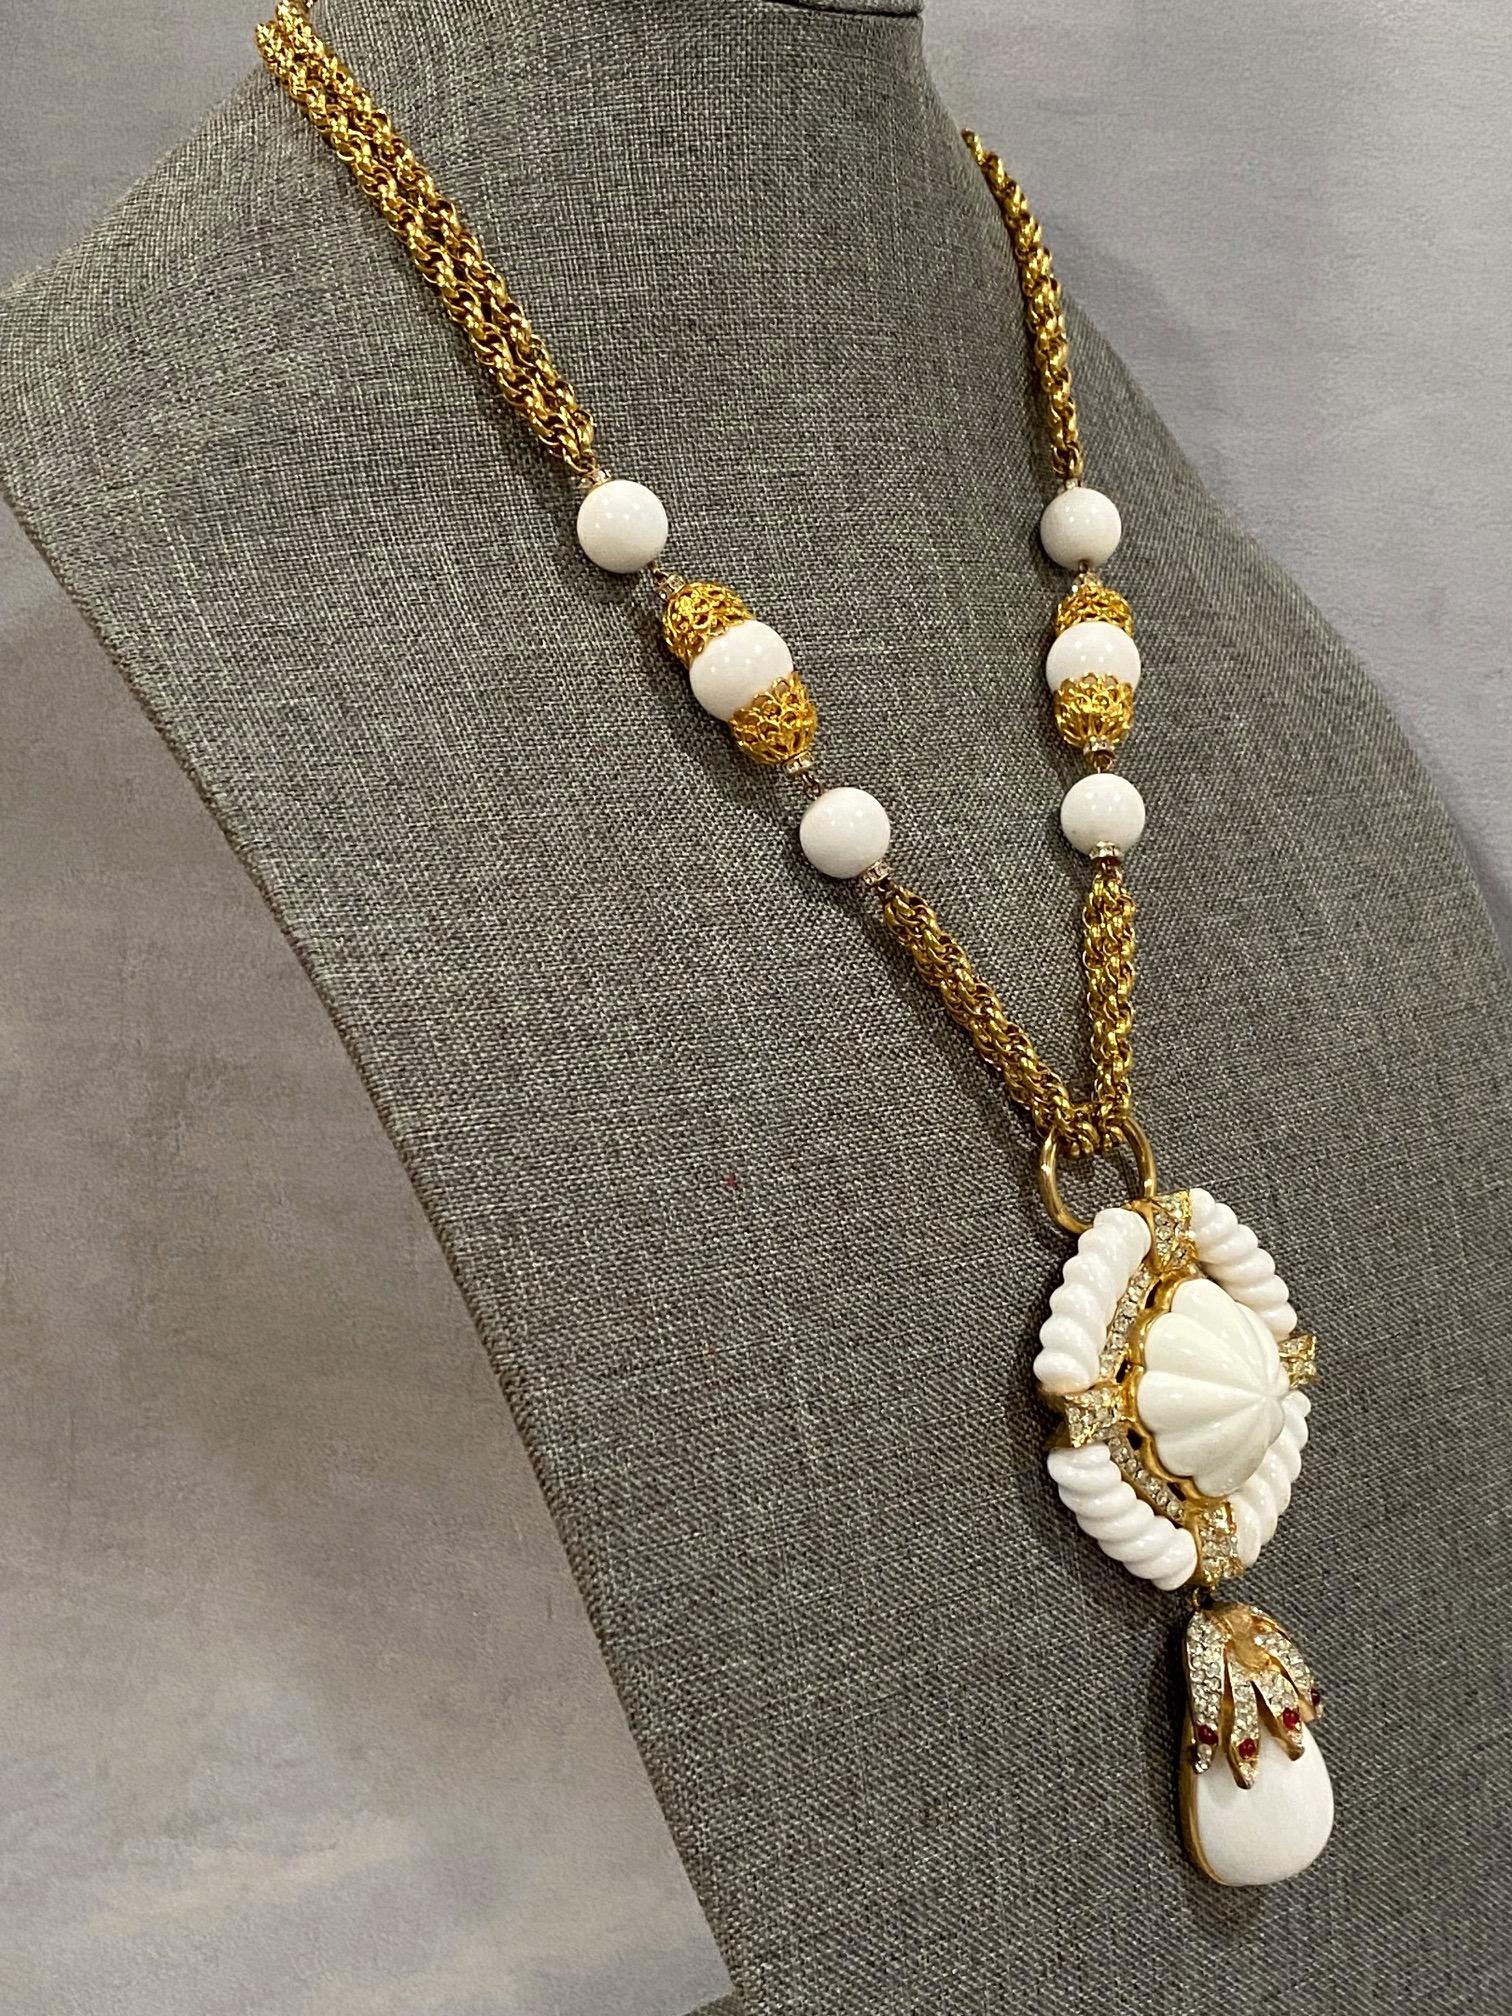 Les Bernard 1980s Pendant Necklace in Gold & White with Rhinestone Accent For Sale 3